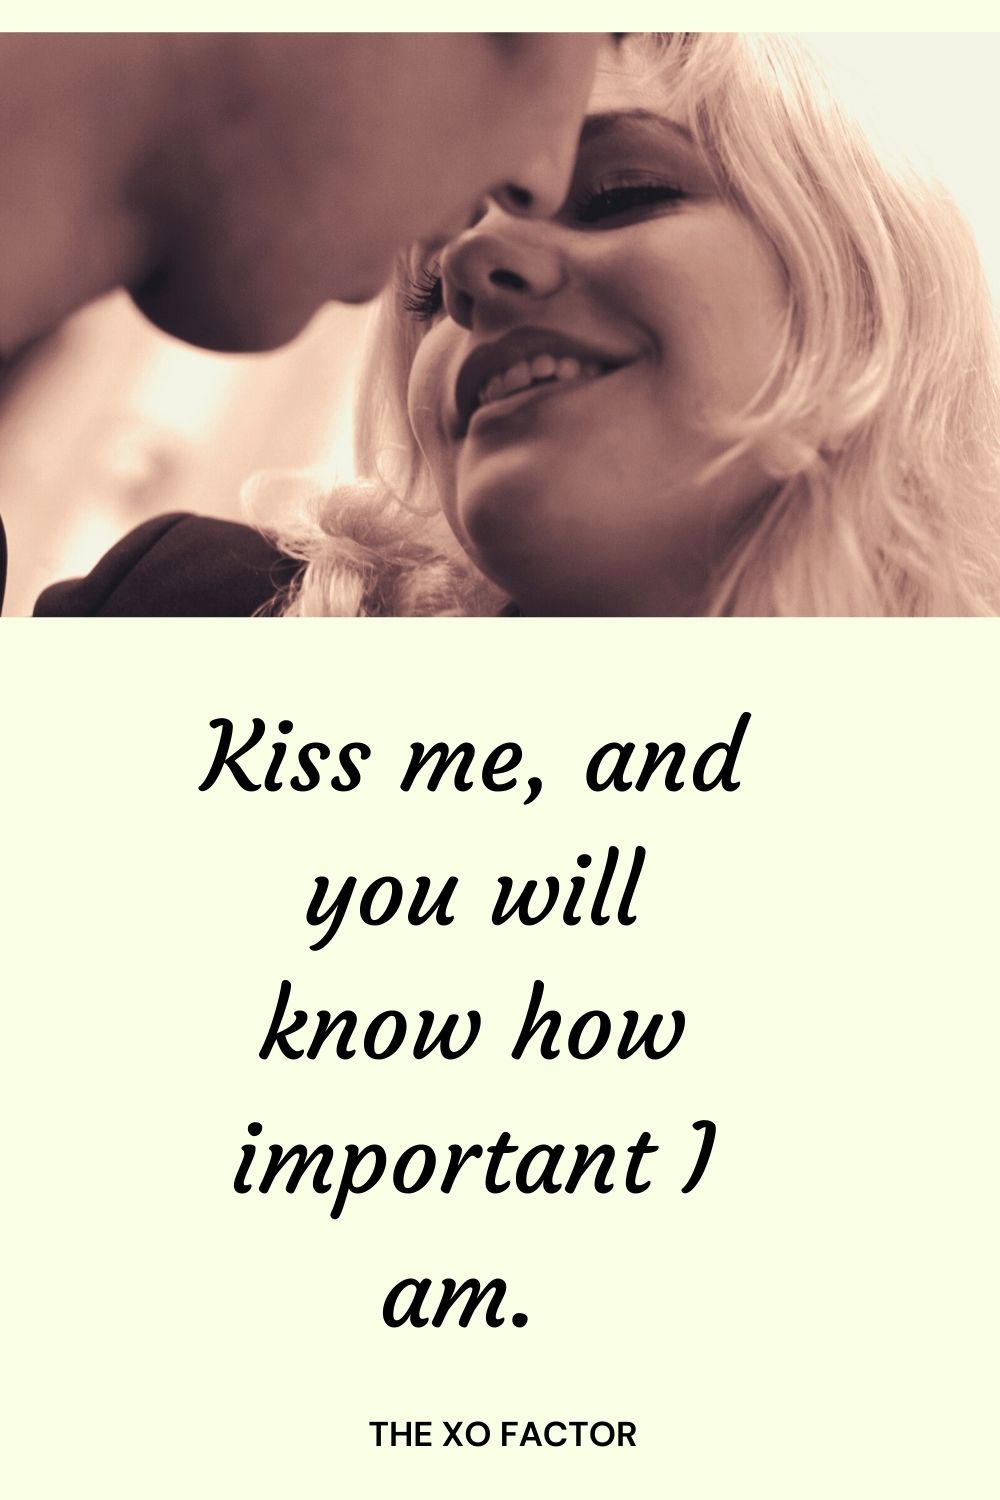 Kiss me, and you will know how important I am.